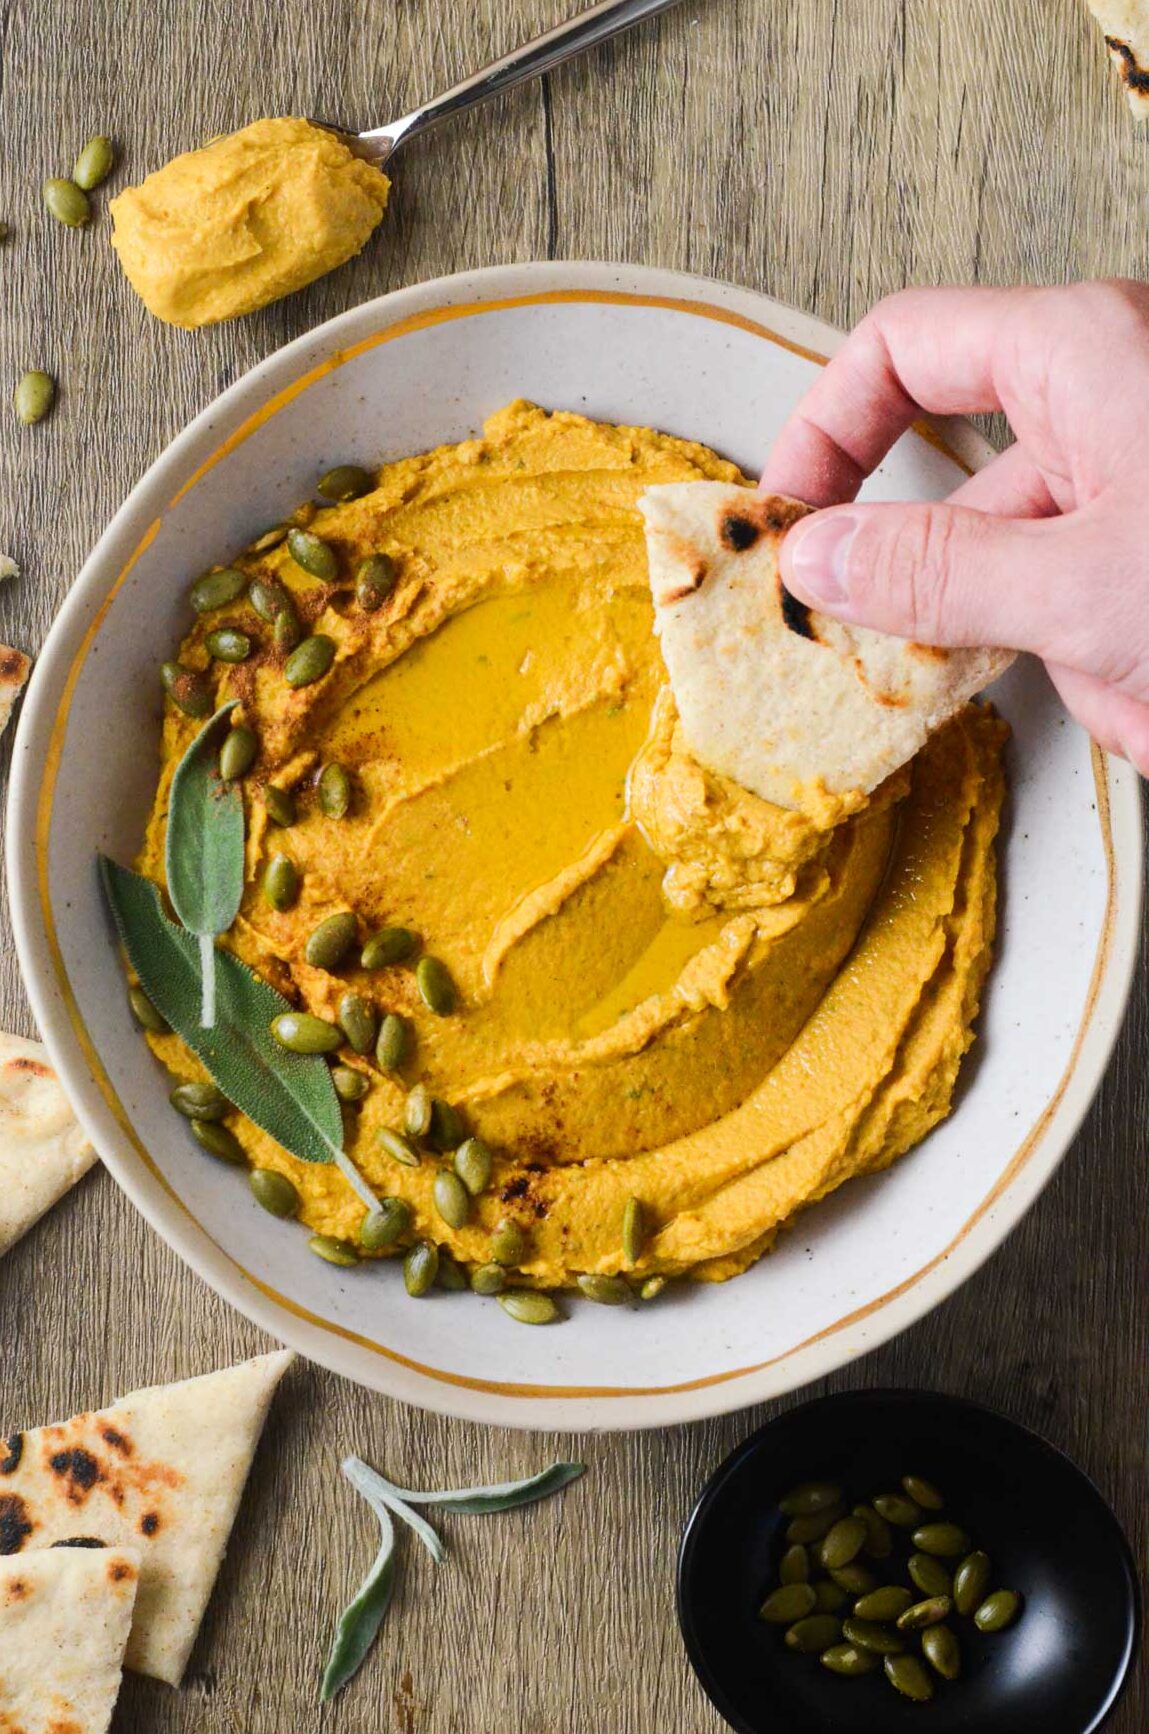 pumpkin hummus in a bowl with a hand dipping pita into it.